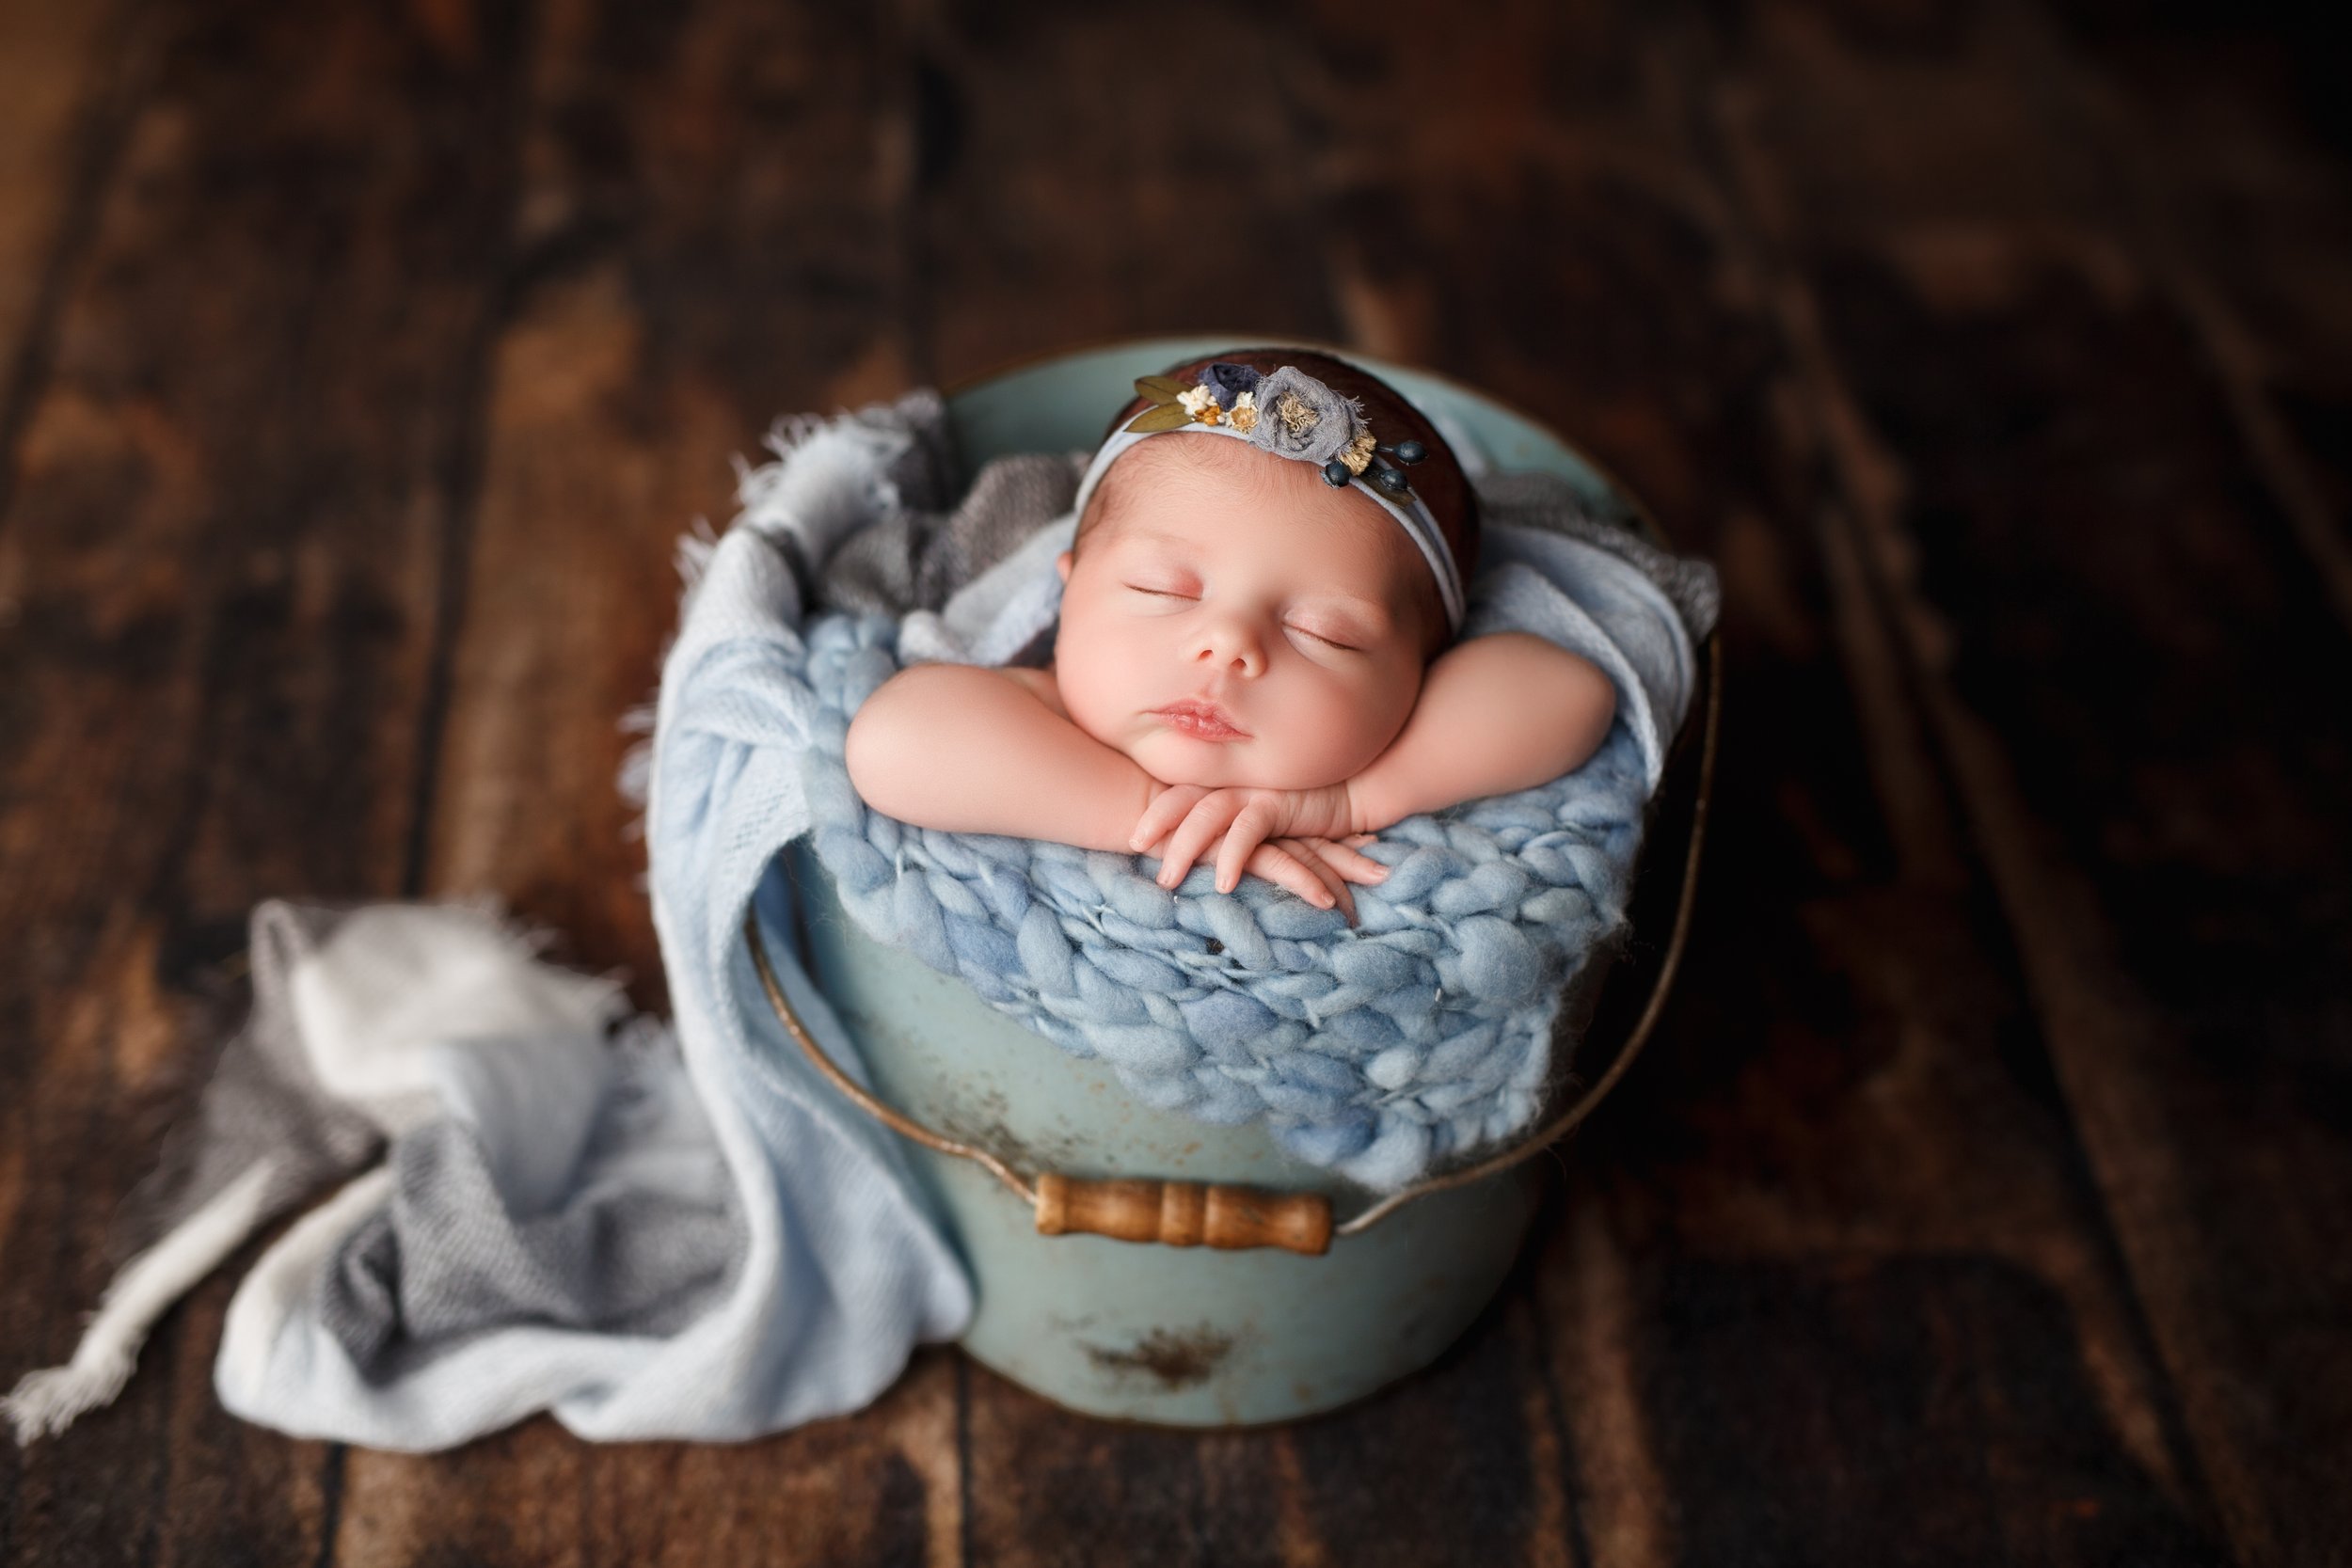  Baby girl in cozy blue wrap sleeps with her chin on her hands in an old-fashioned bucket 